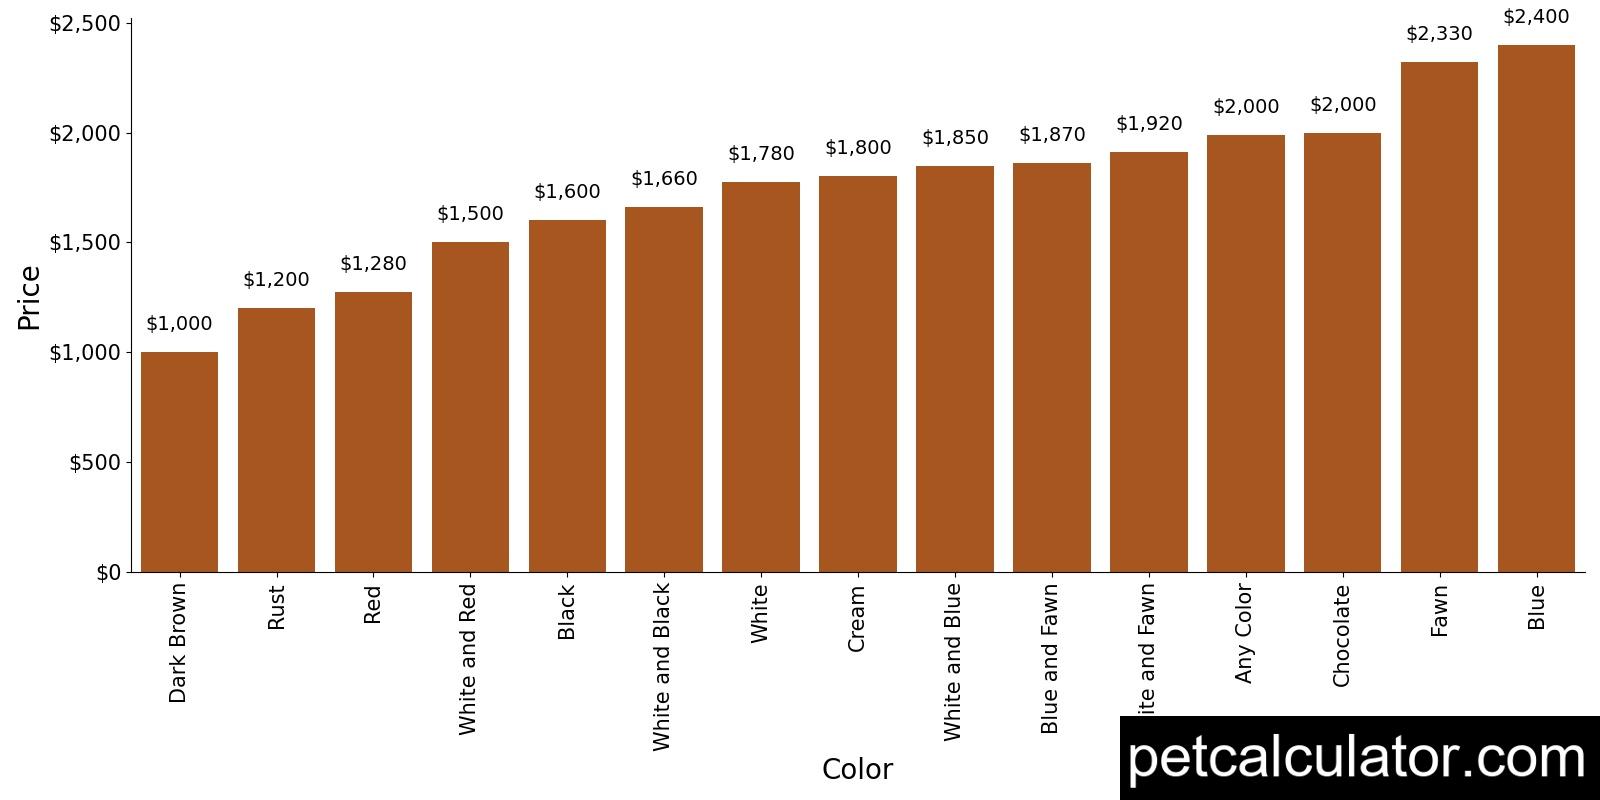 Price of Italian Greyhound by Color 